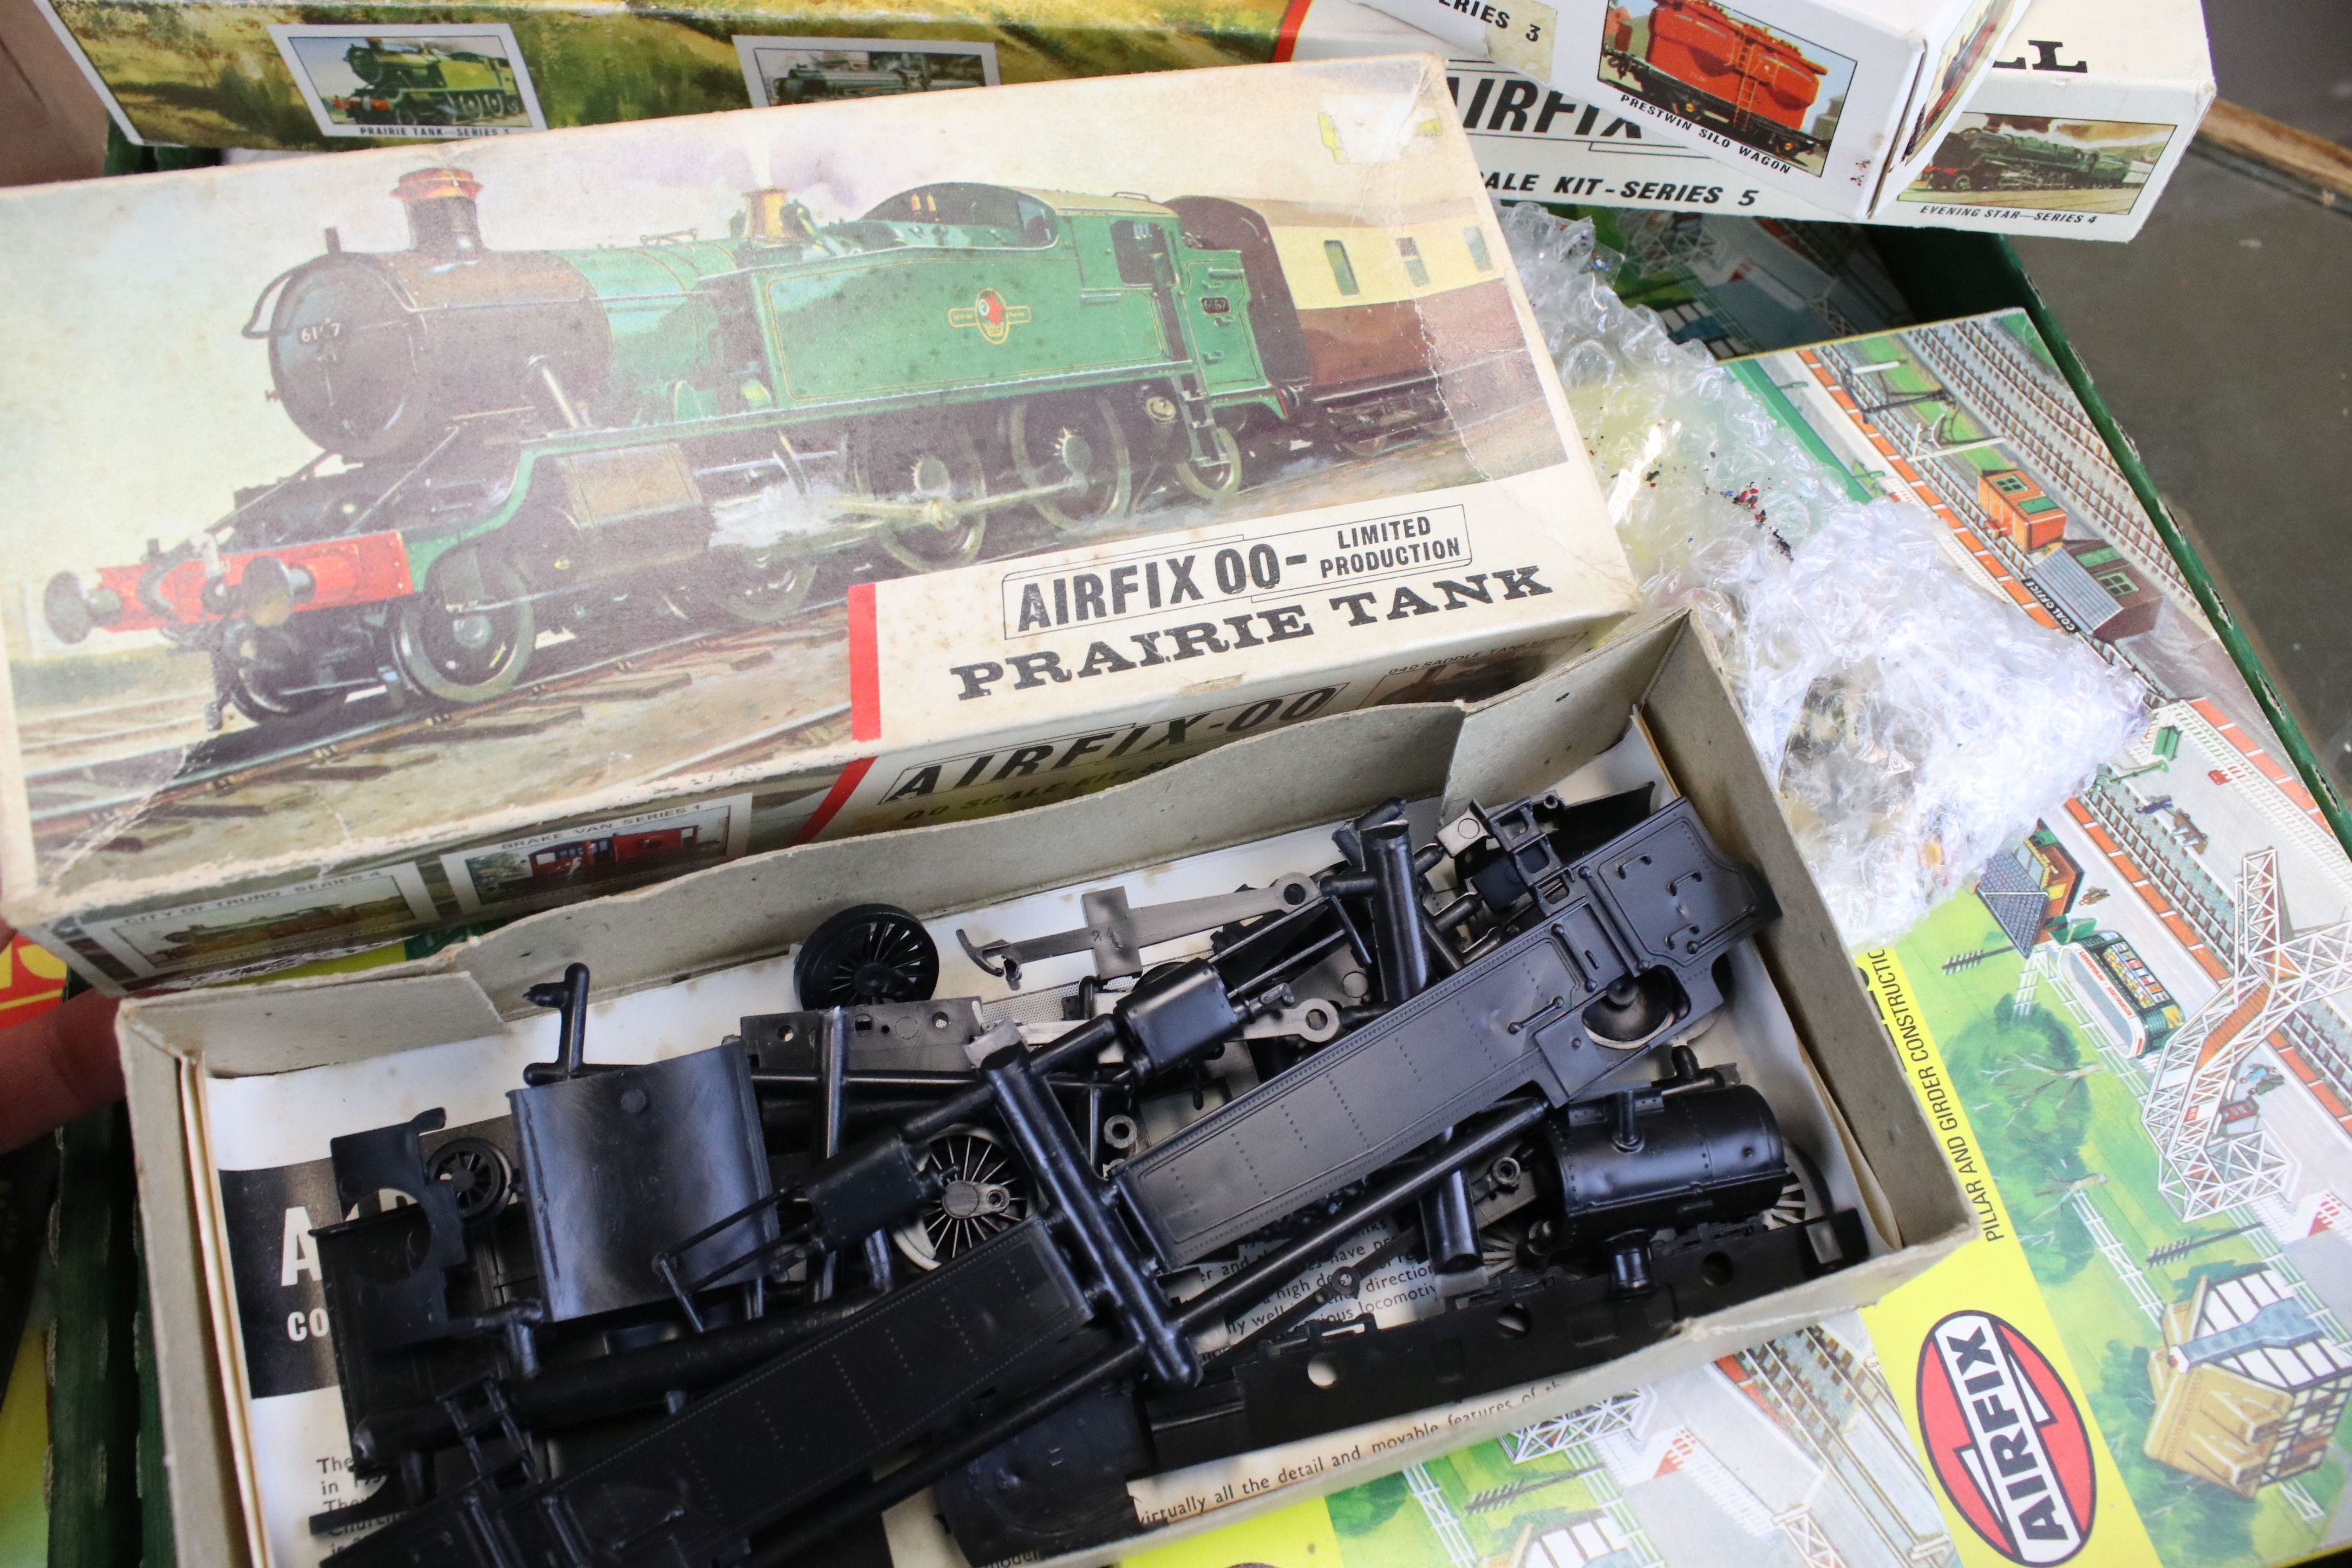 Airfix OO/HO - 44 Boxed & bagged Airfix plastic railway model kits to include 10 x locos (3 x 0-4- - Image 16 of 20